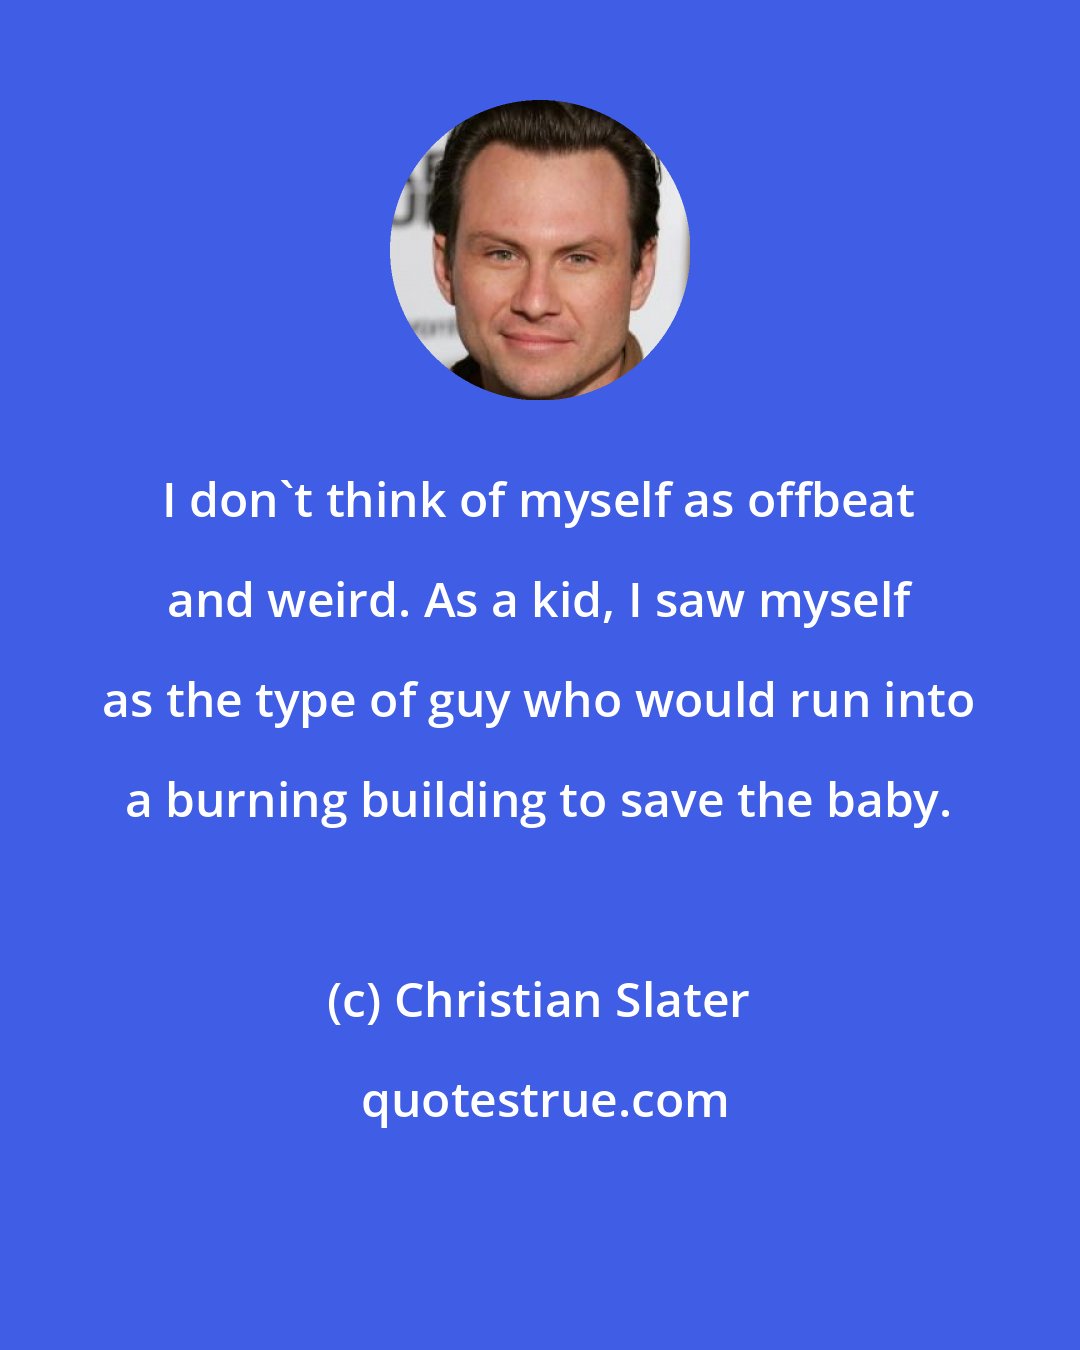 Christian Slater: I don't think of myself as offbeat and weird. As a kid, I saw myself as the type of guy who would run into a burning building to save the baby.